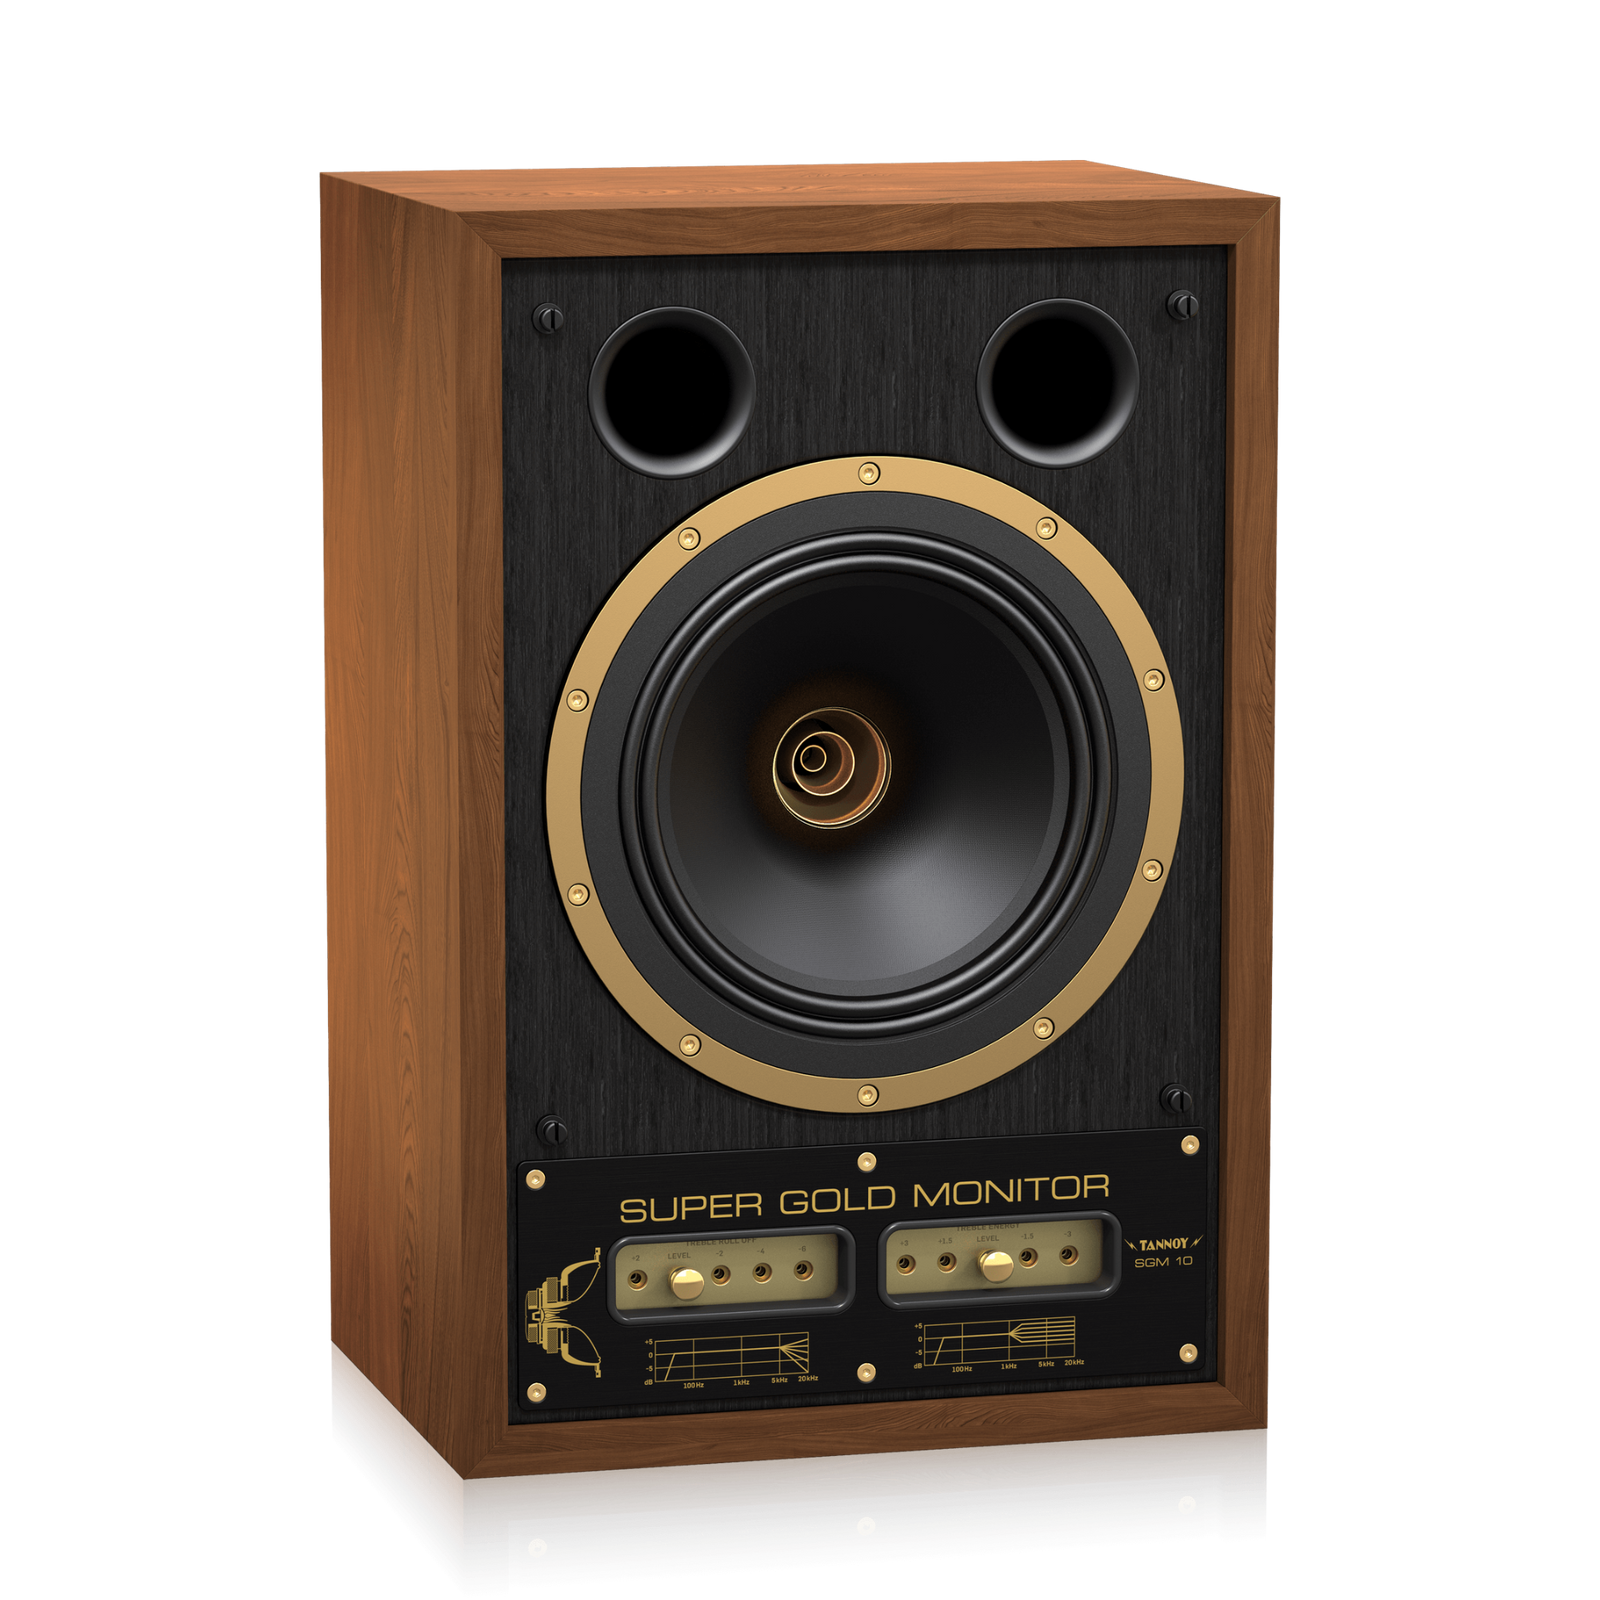 TANNOY SGM 10 HERITAGE STUDIO MAIN 10 is a 2-Way Standmount 10” Dual Concentric HiFi Loudspeaker Product Features 10" passive studio main monitor based on the legendary Tannoy SUPER GOLD Legendary Tannoy Dual Concentric driver technology provides class-leading phase coherence and point-source imaging Ultra-precise and neutral soundstage delivers